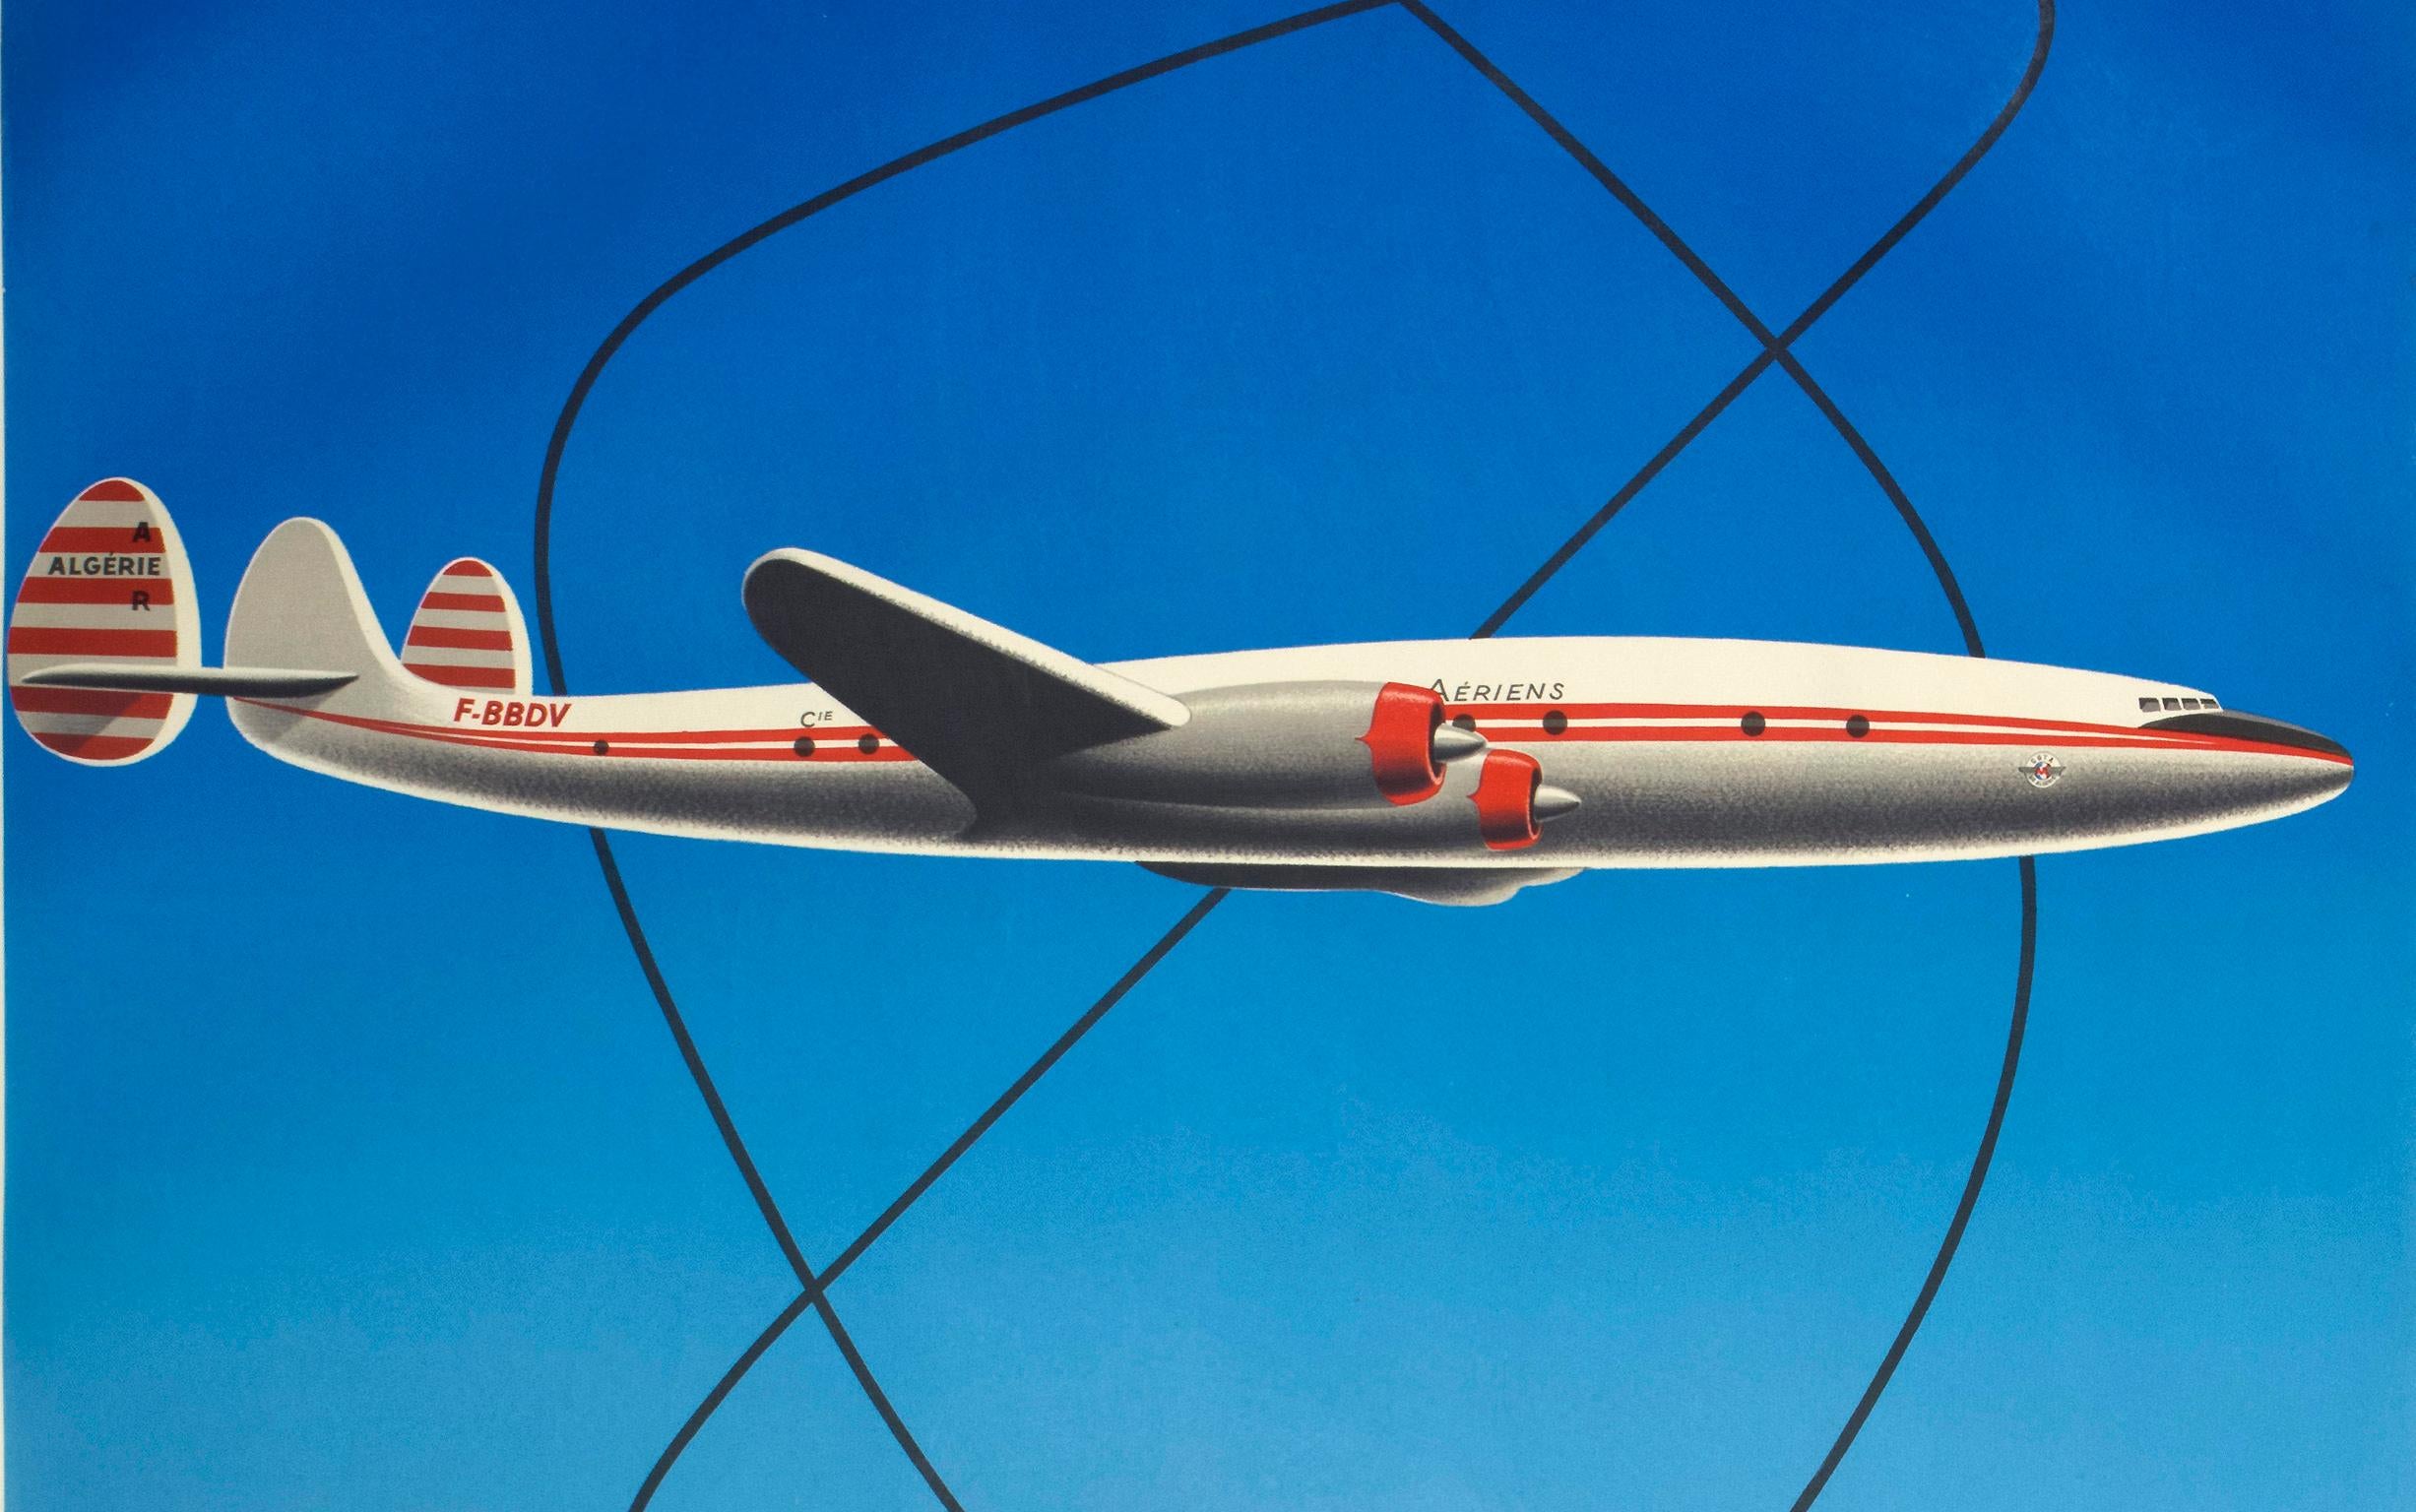 French 1950s Air Algerie Poster by Georget Featuring a Lockheed Constellation